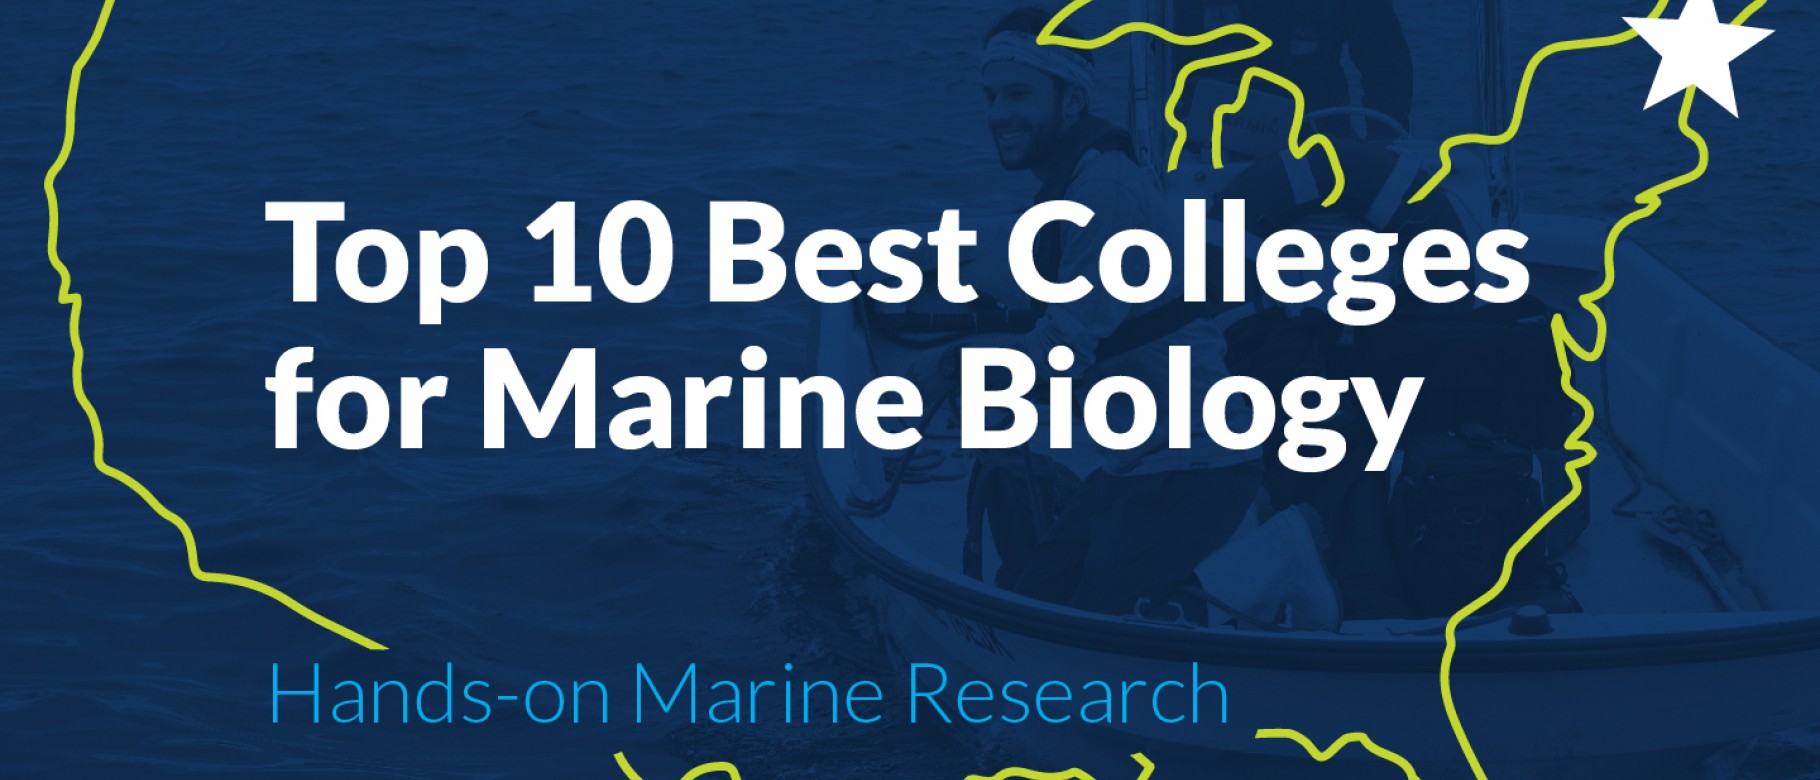 College Magazine lists UNE in top 10 for best marine biology programs